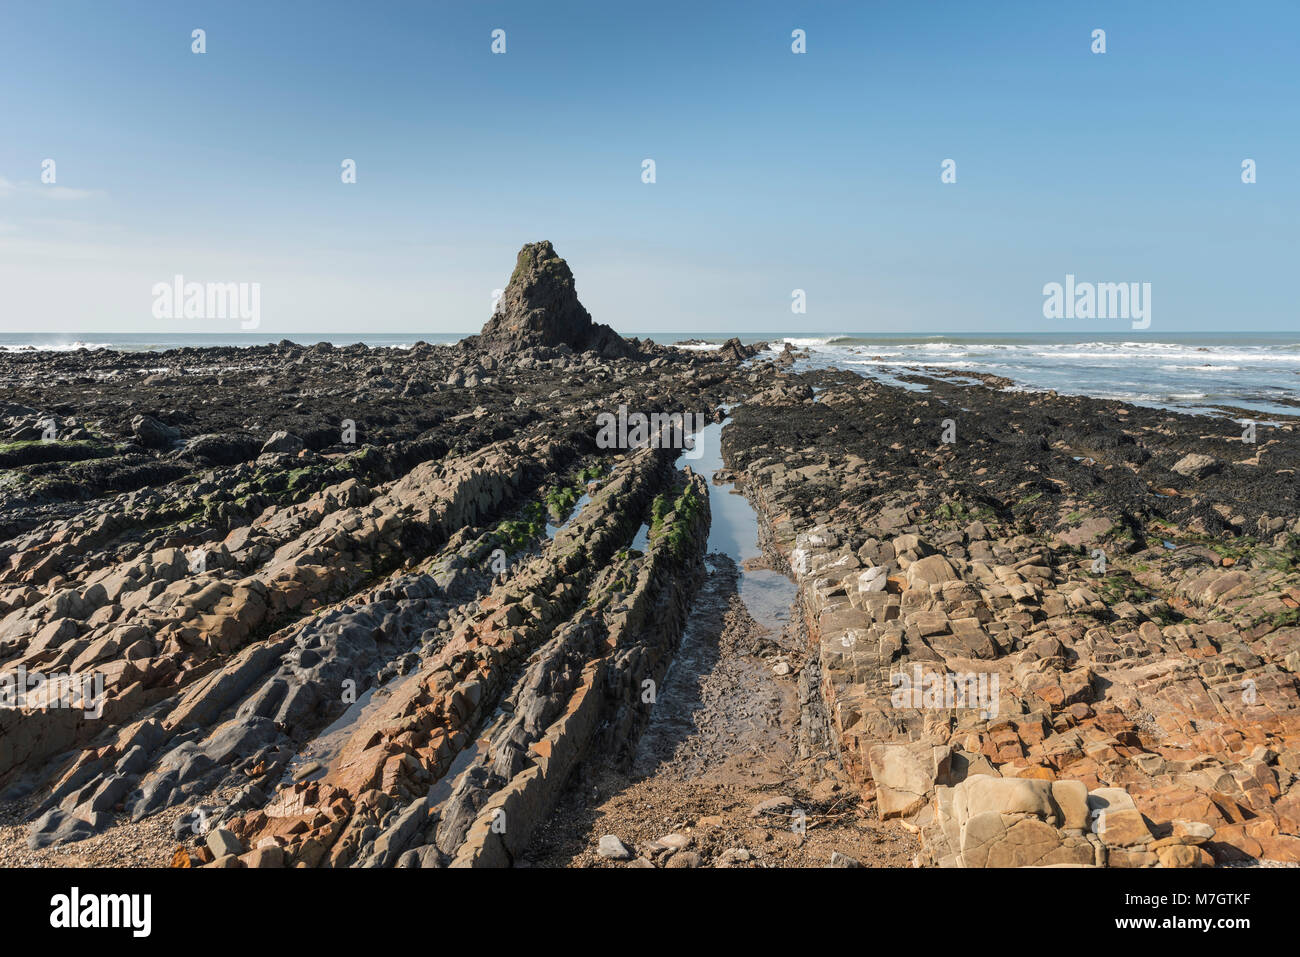 Black Rock and rock formations on beach at Widemouth Bay, North Cornwall Stock Photo